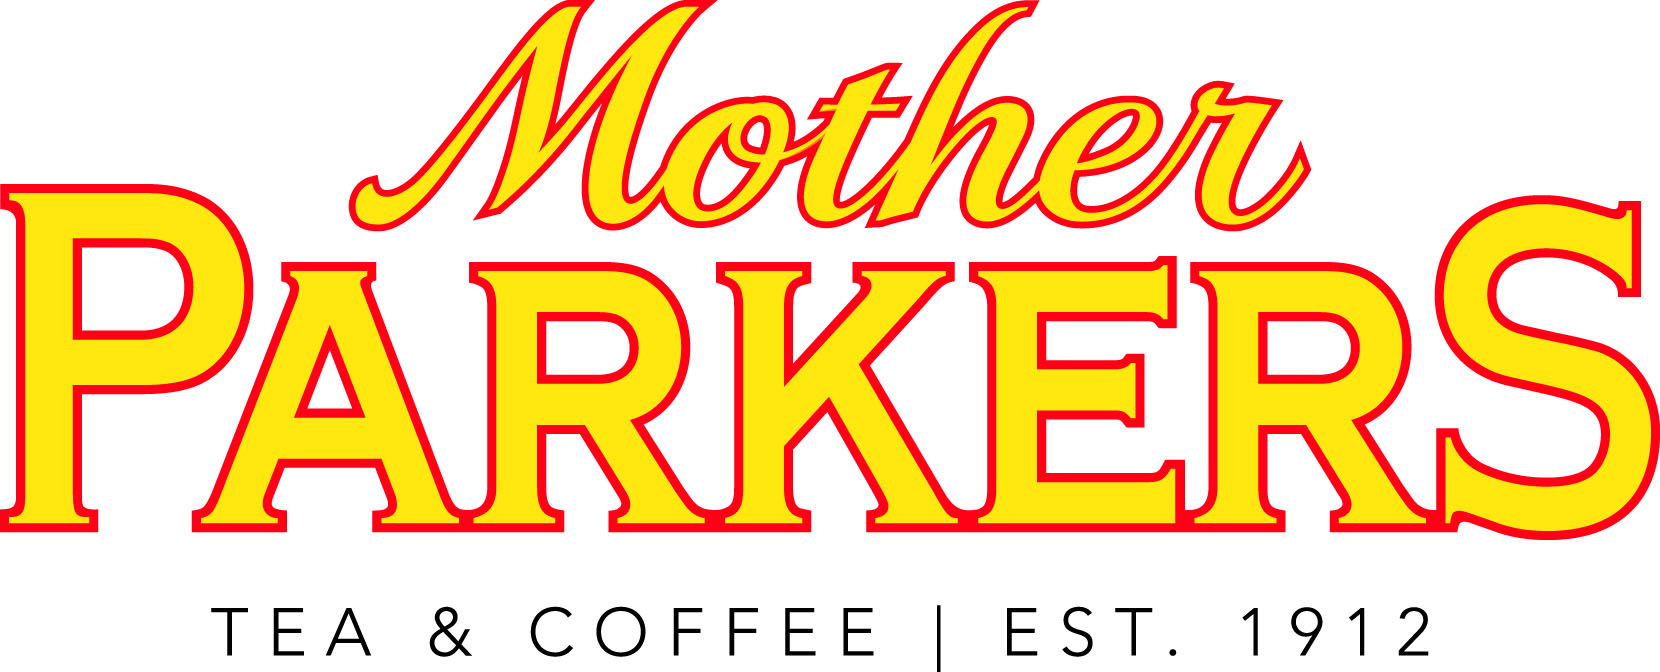 Mother Parkers Logo